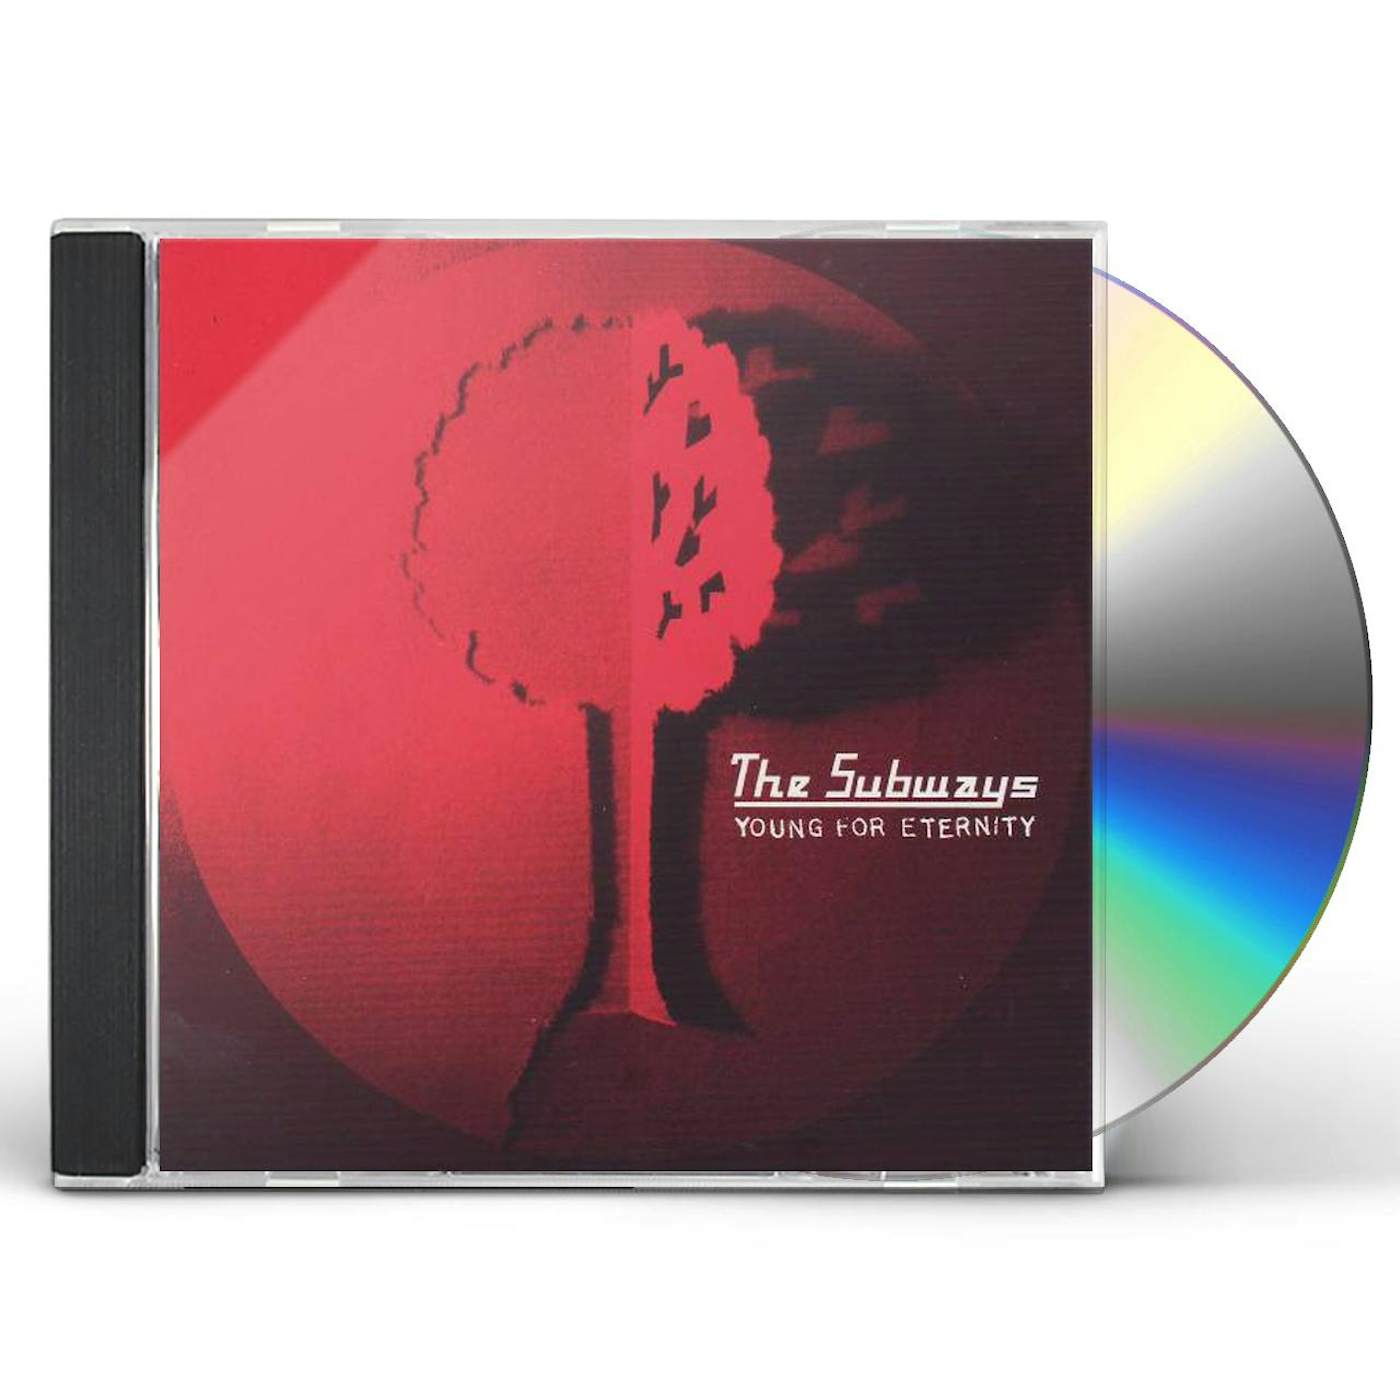 The Subways YOUNG FOR ETERNITY CD